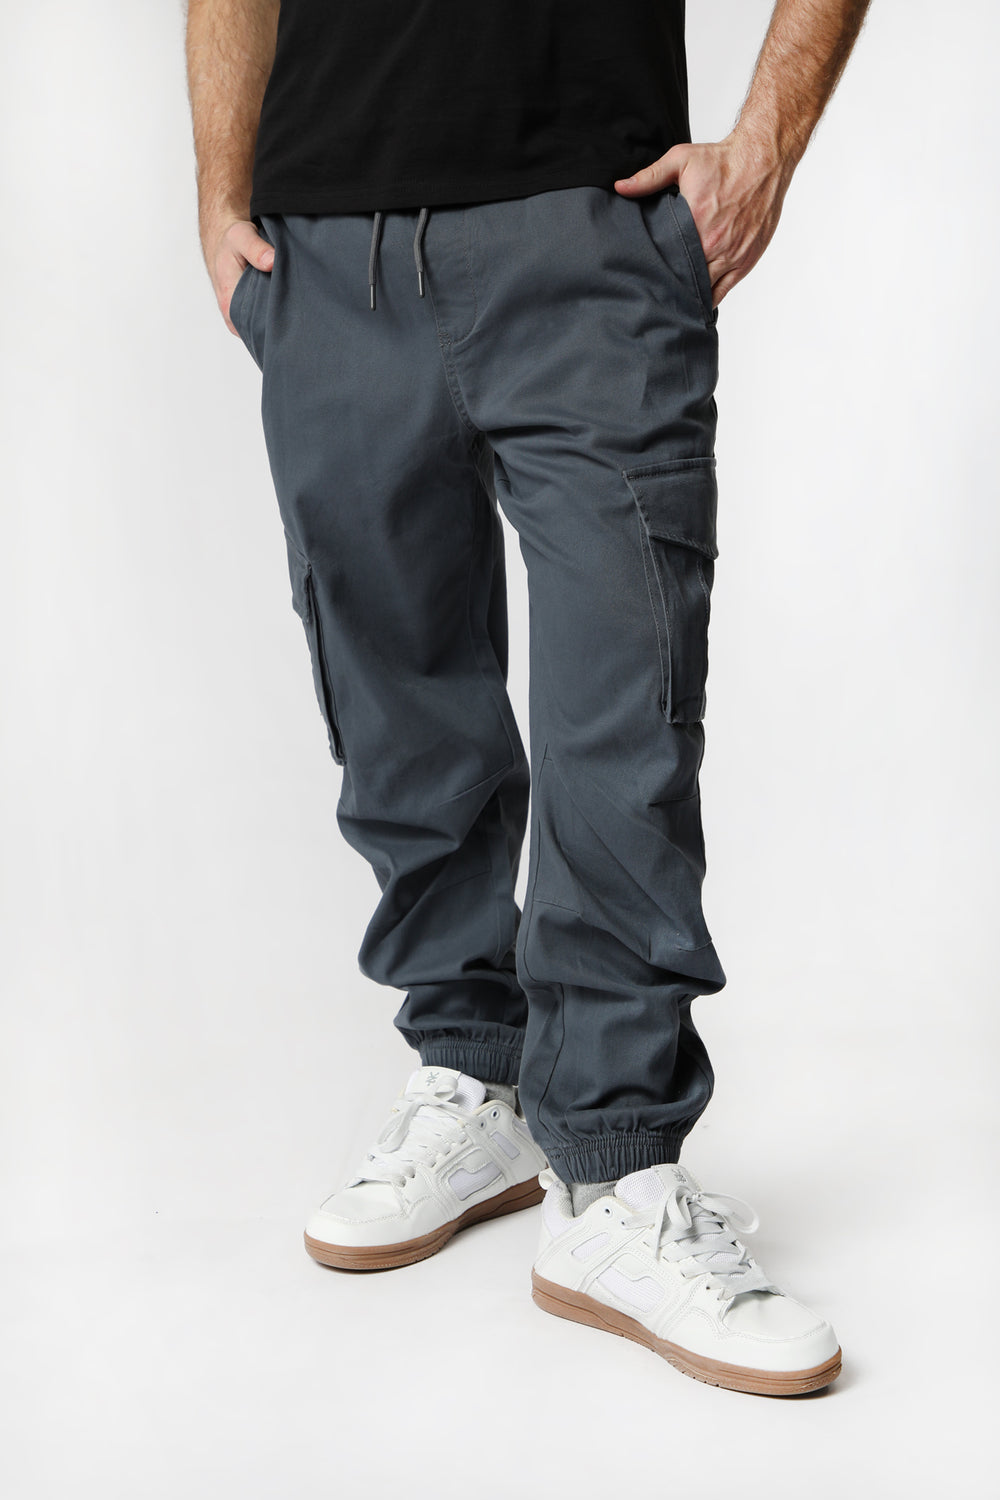 West49 Mens Twill Cargo Jogger West49 Mens Twill Cargo Jogger